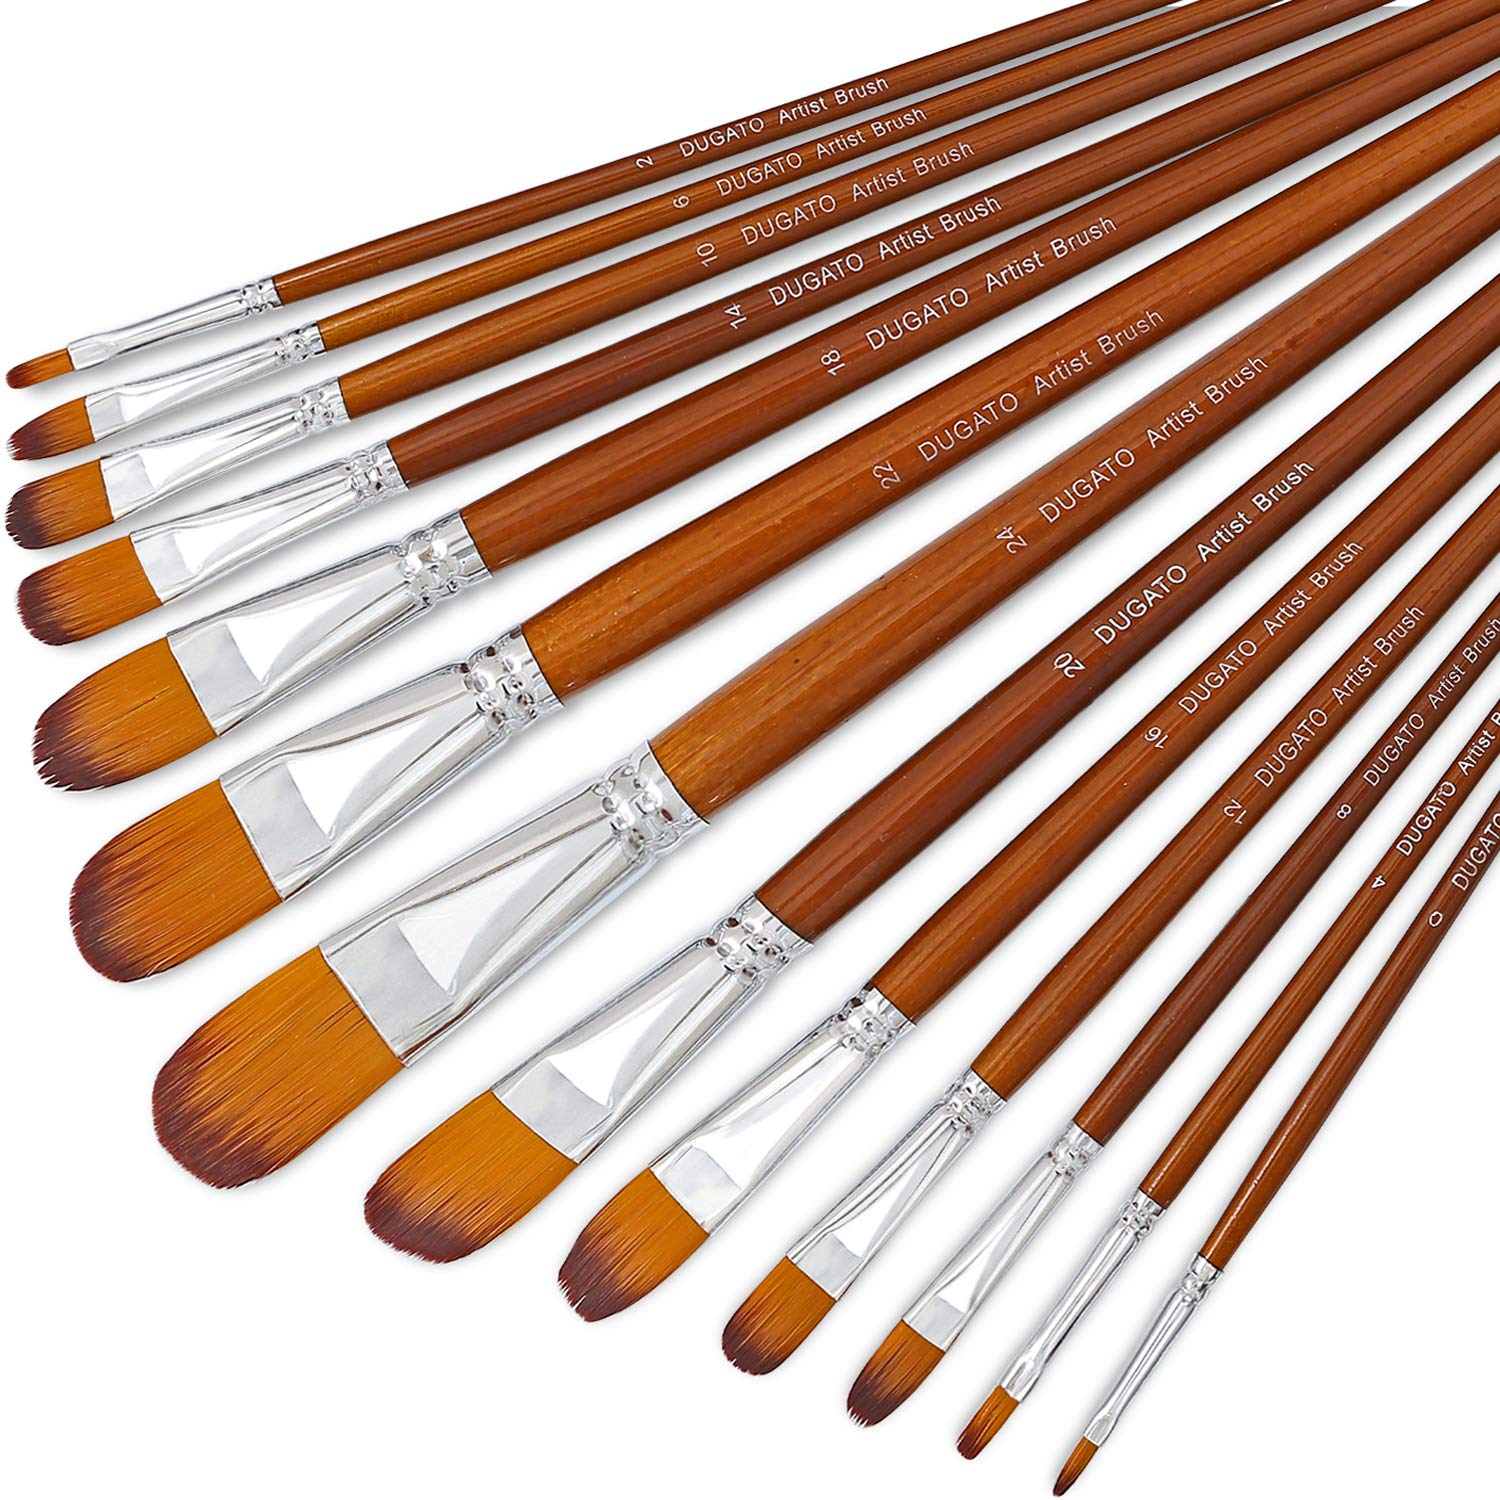 14 Pieces of Painting Brushes - 1 Inch Art Bulk Paint Brushes for Acrylic  Painting - Flat Synthetic Paint Brush for Art Crafts Acrylic Painting